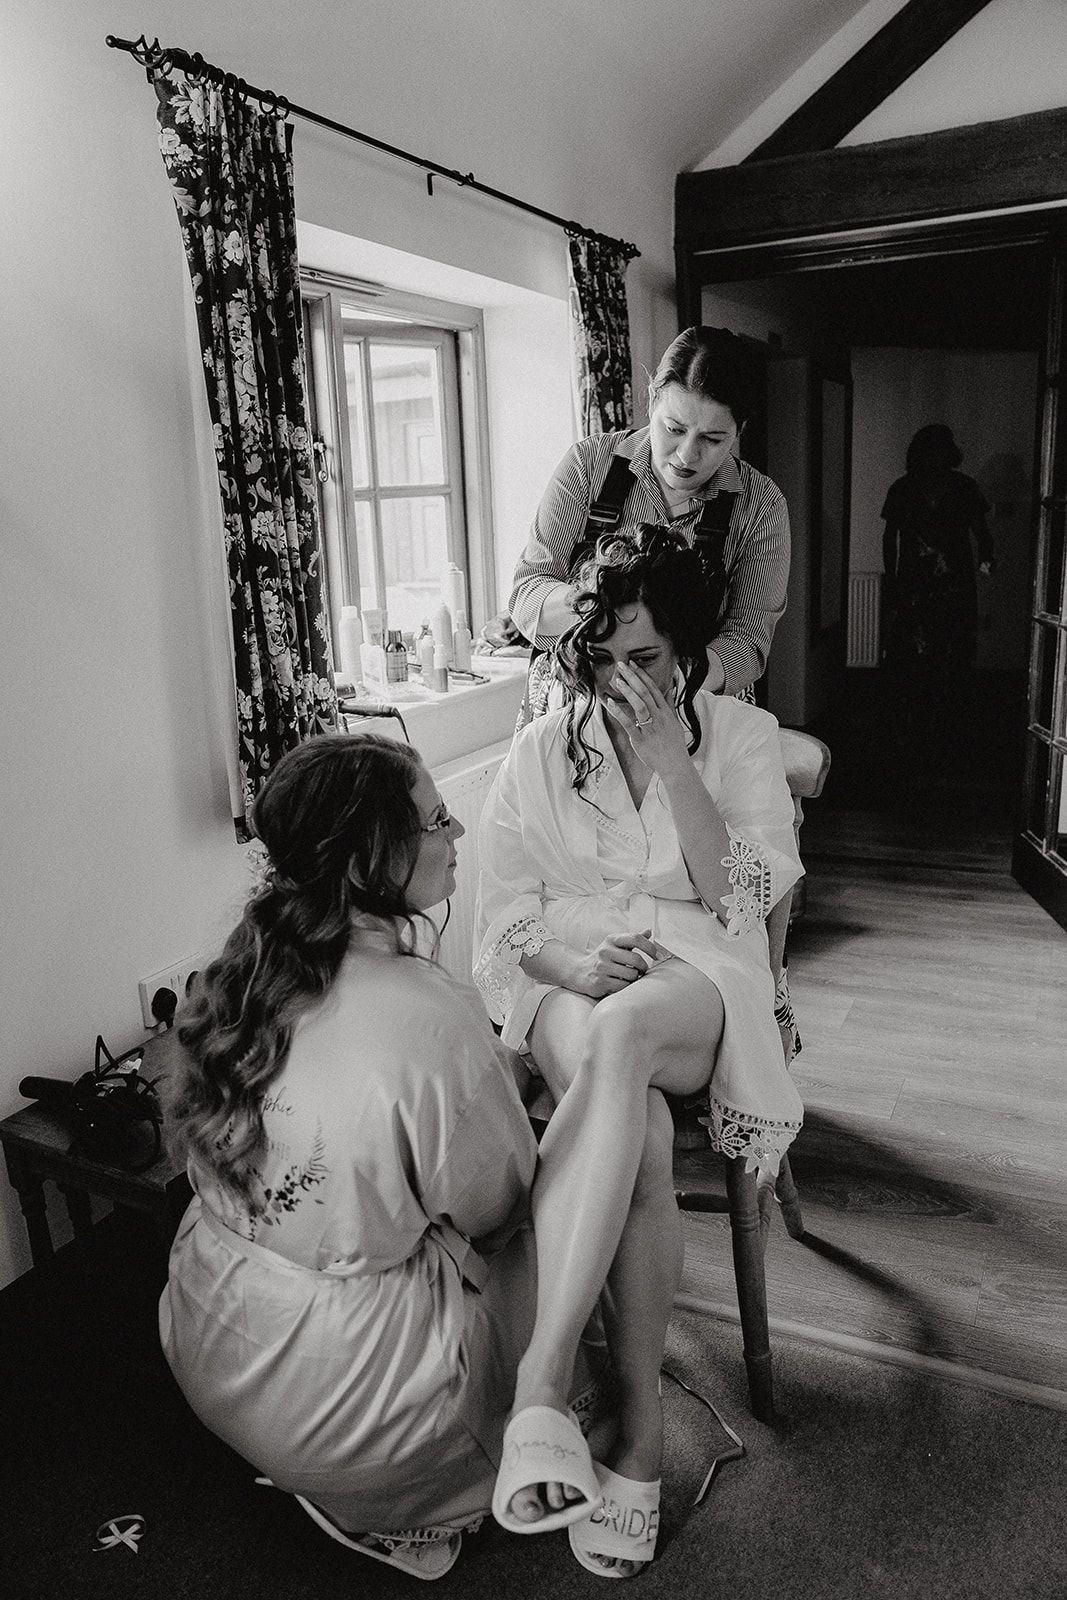 Bride Georgie crying happy tears whilst having her hair styled on the morning of her wedding at Huntsmill Farm. She's being consoled by her bridesmaid. Photo thanks to Sam and Steve Photography.